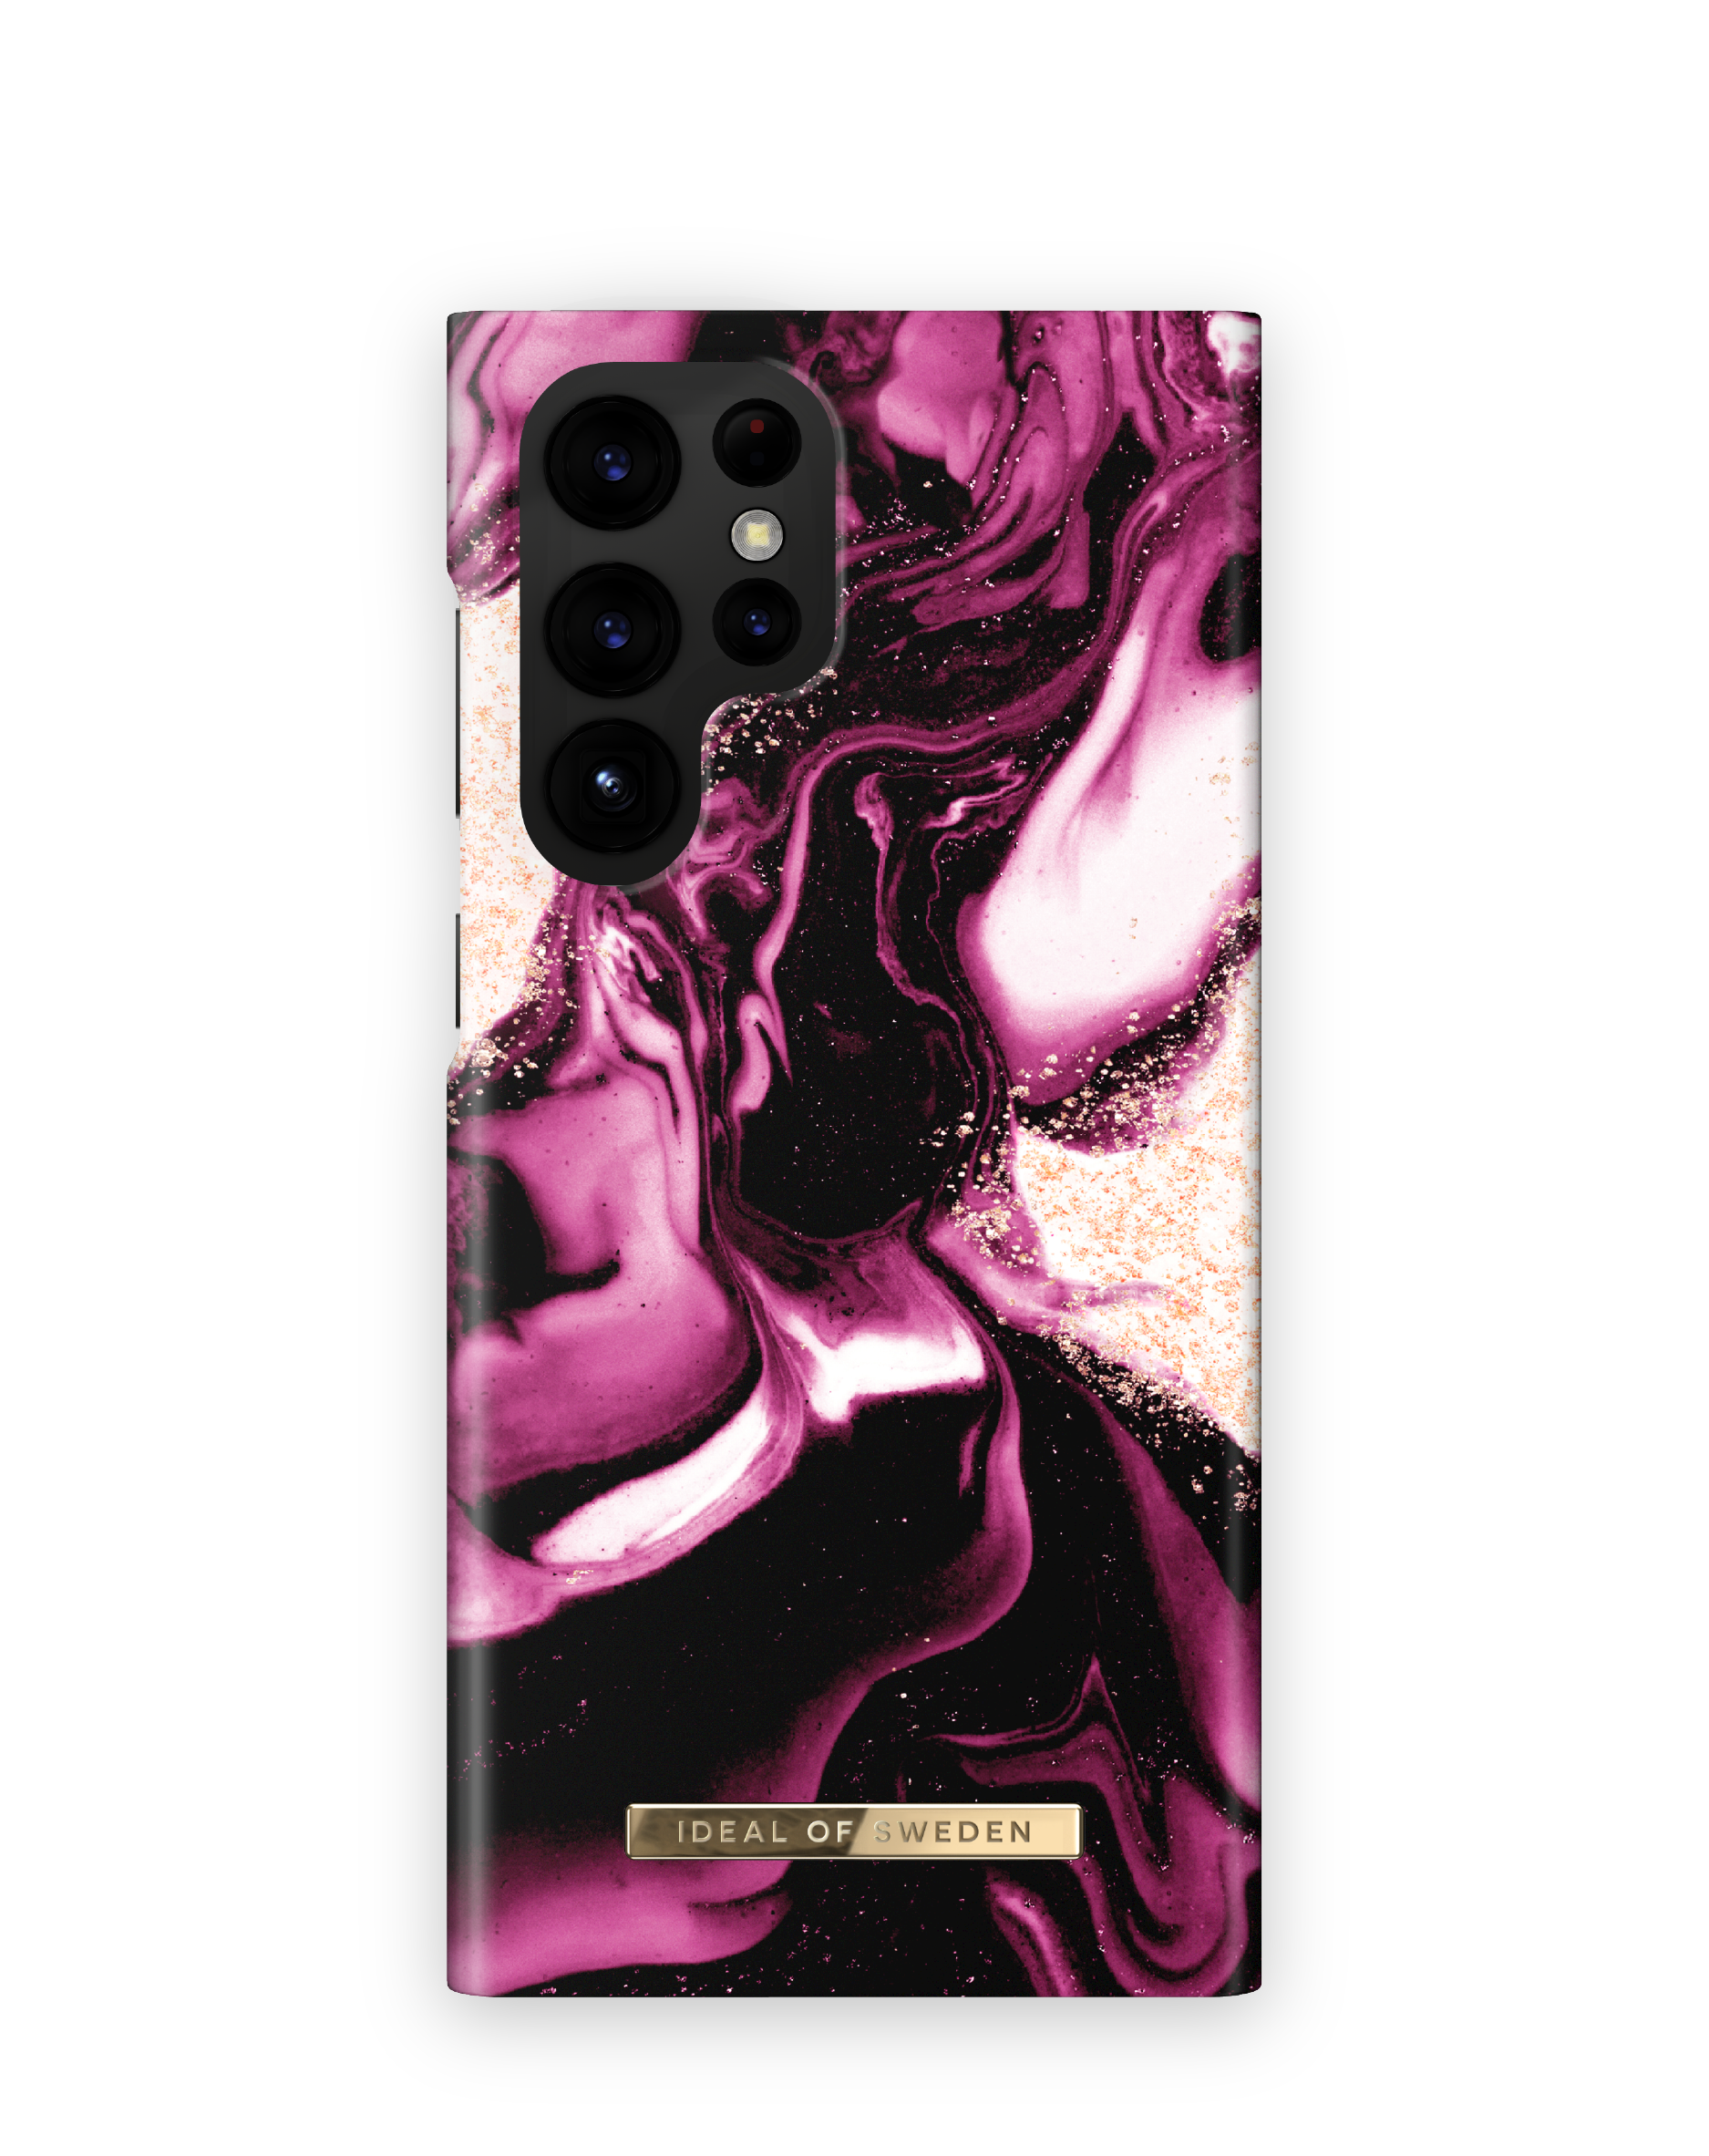 Samsung, IDFCAW21-S22U-319, IDEAL Ultra, Marble Galaxy Ruby Golden OF S22 Backcover, SWEDEN